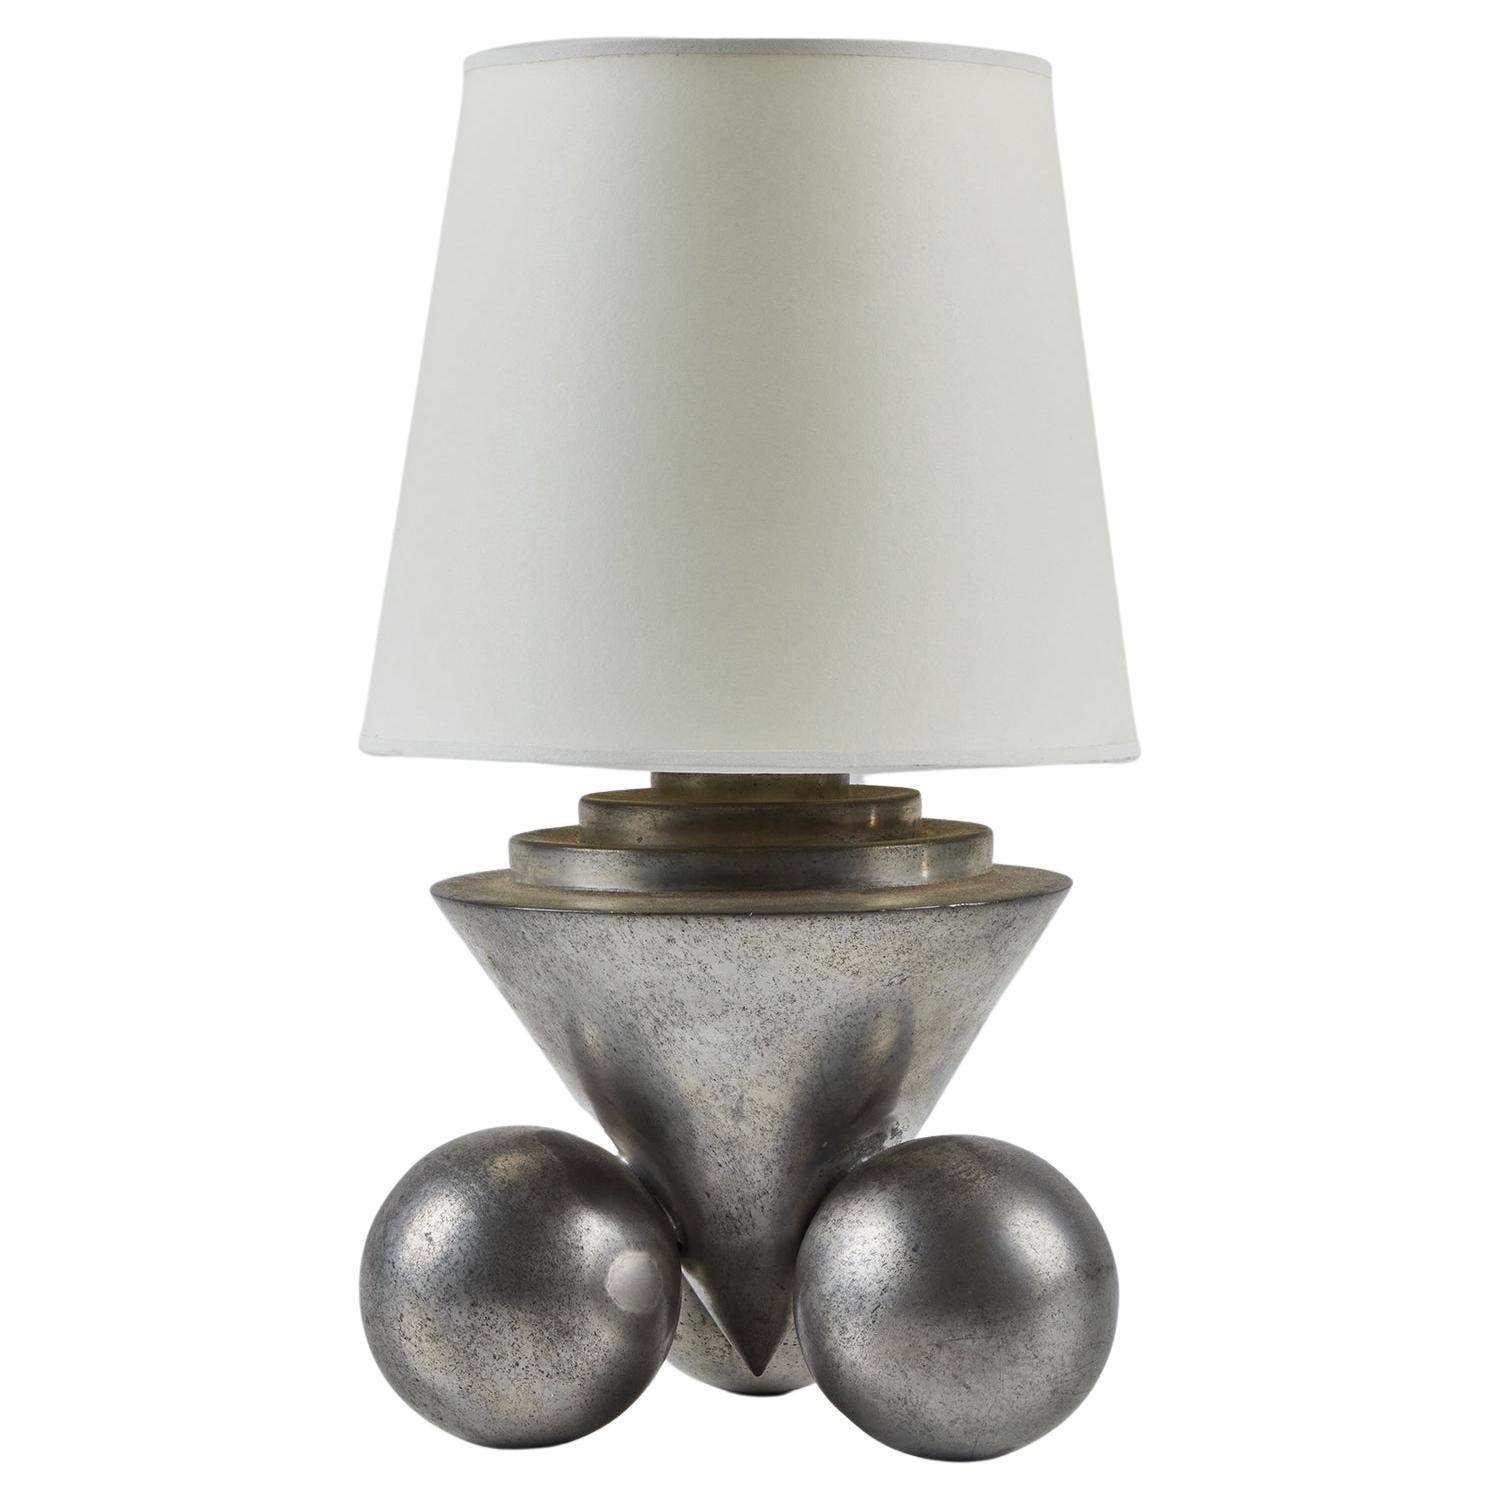 Art Deco Table Lamp in the Style of Chase USA